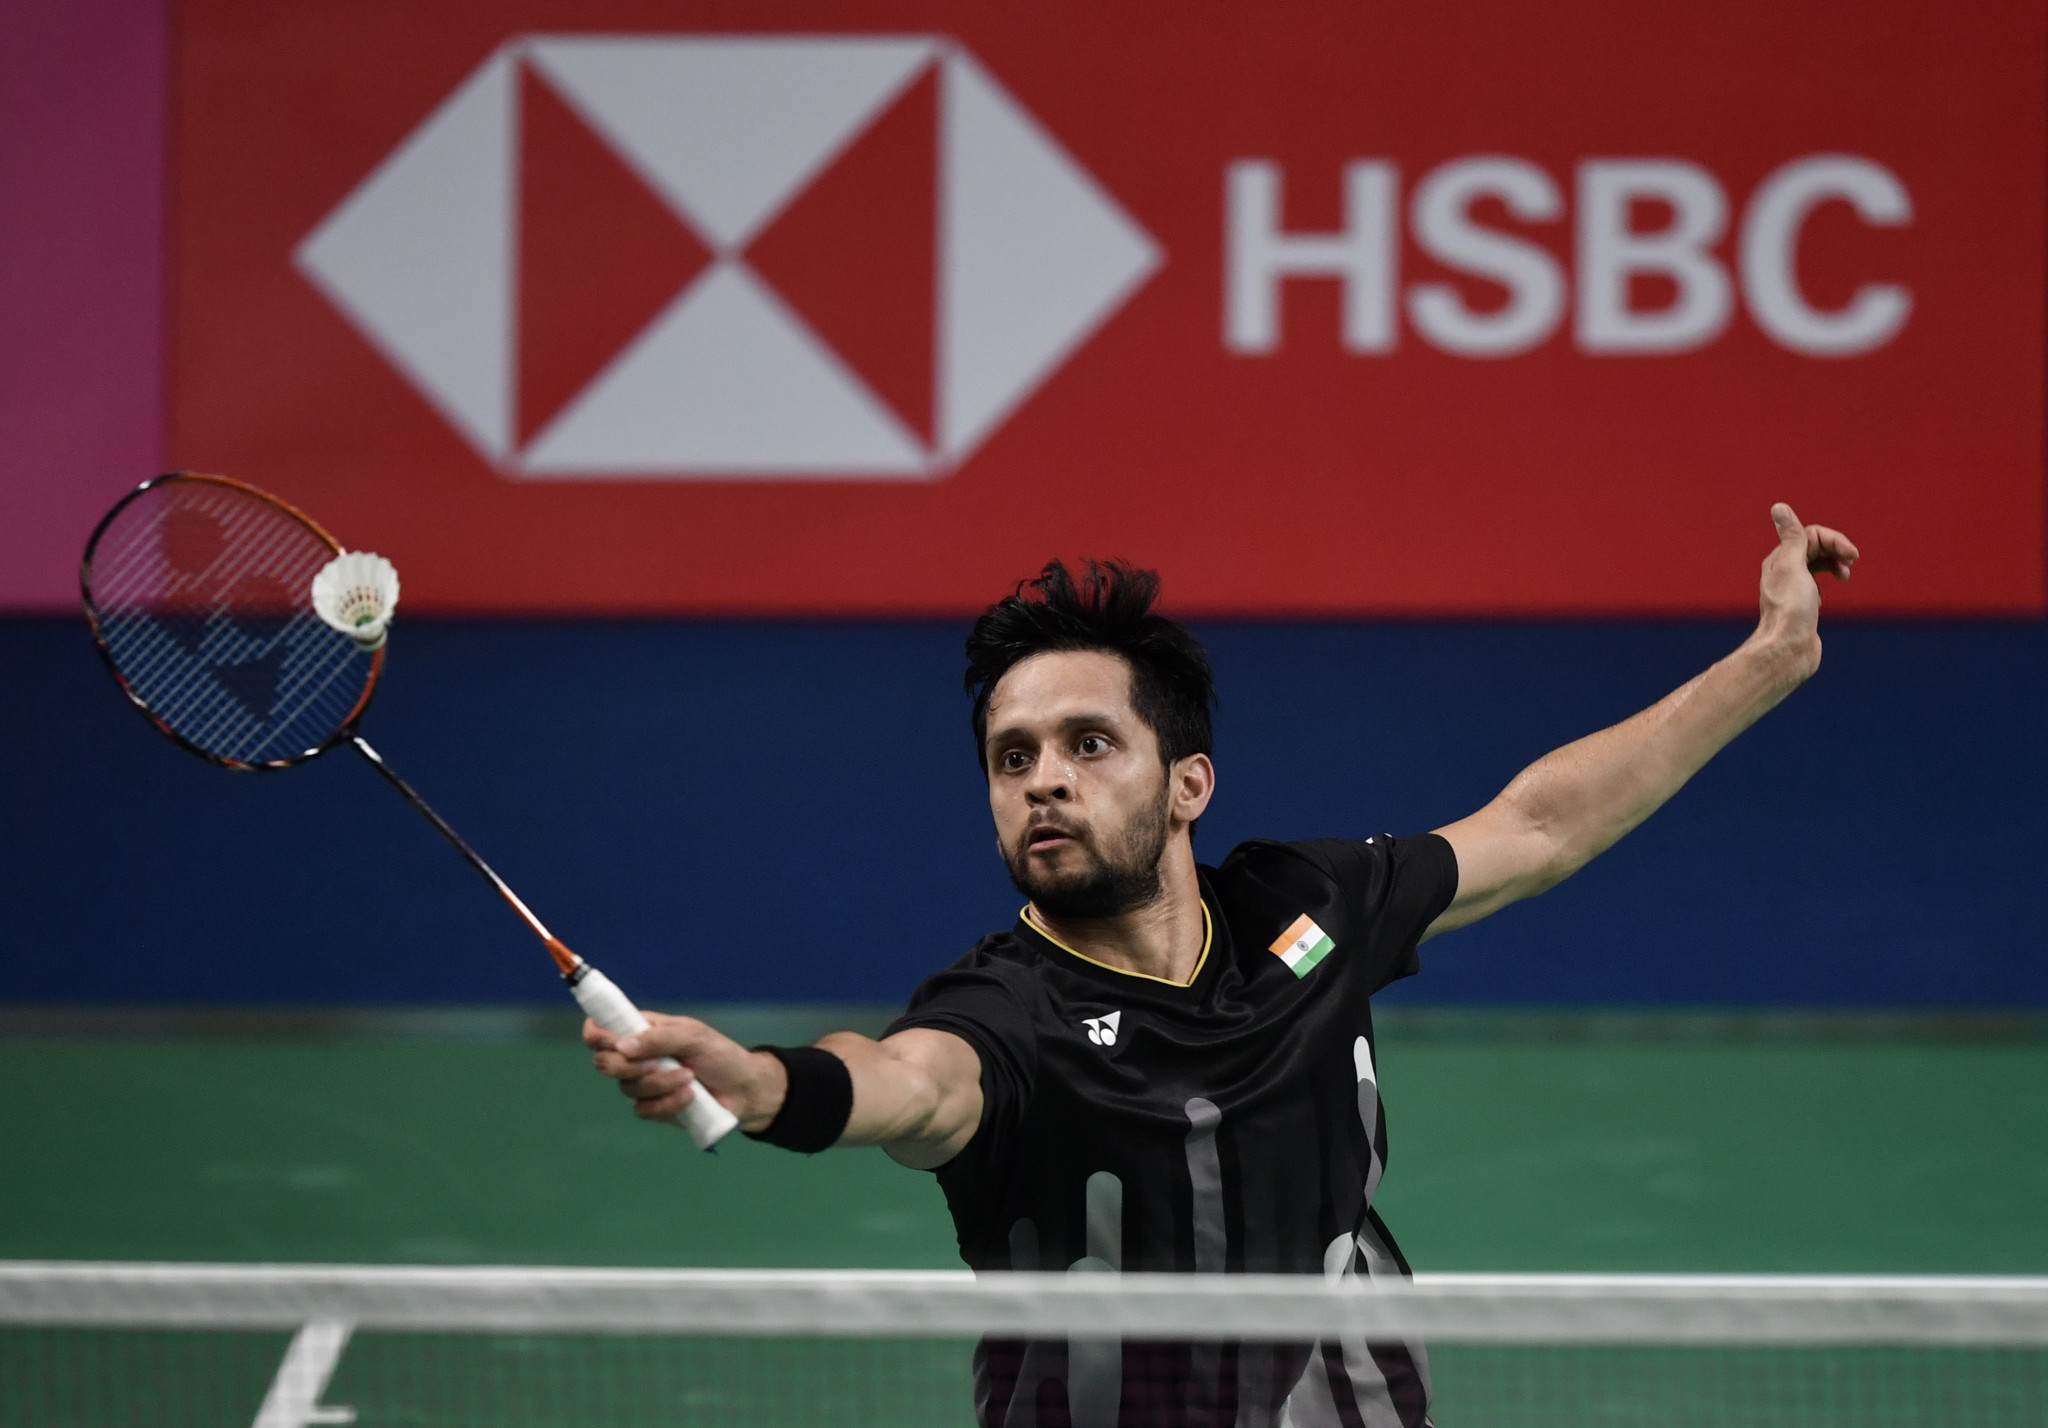 Parupalli Kashyap also called for an extension to the Tokyo 2020 window ©Getty Images